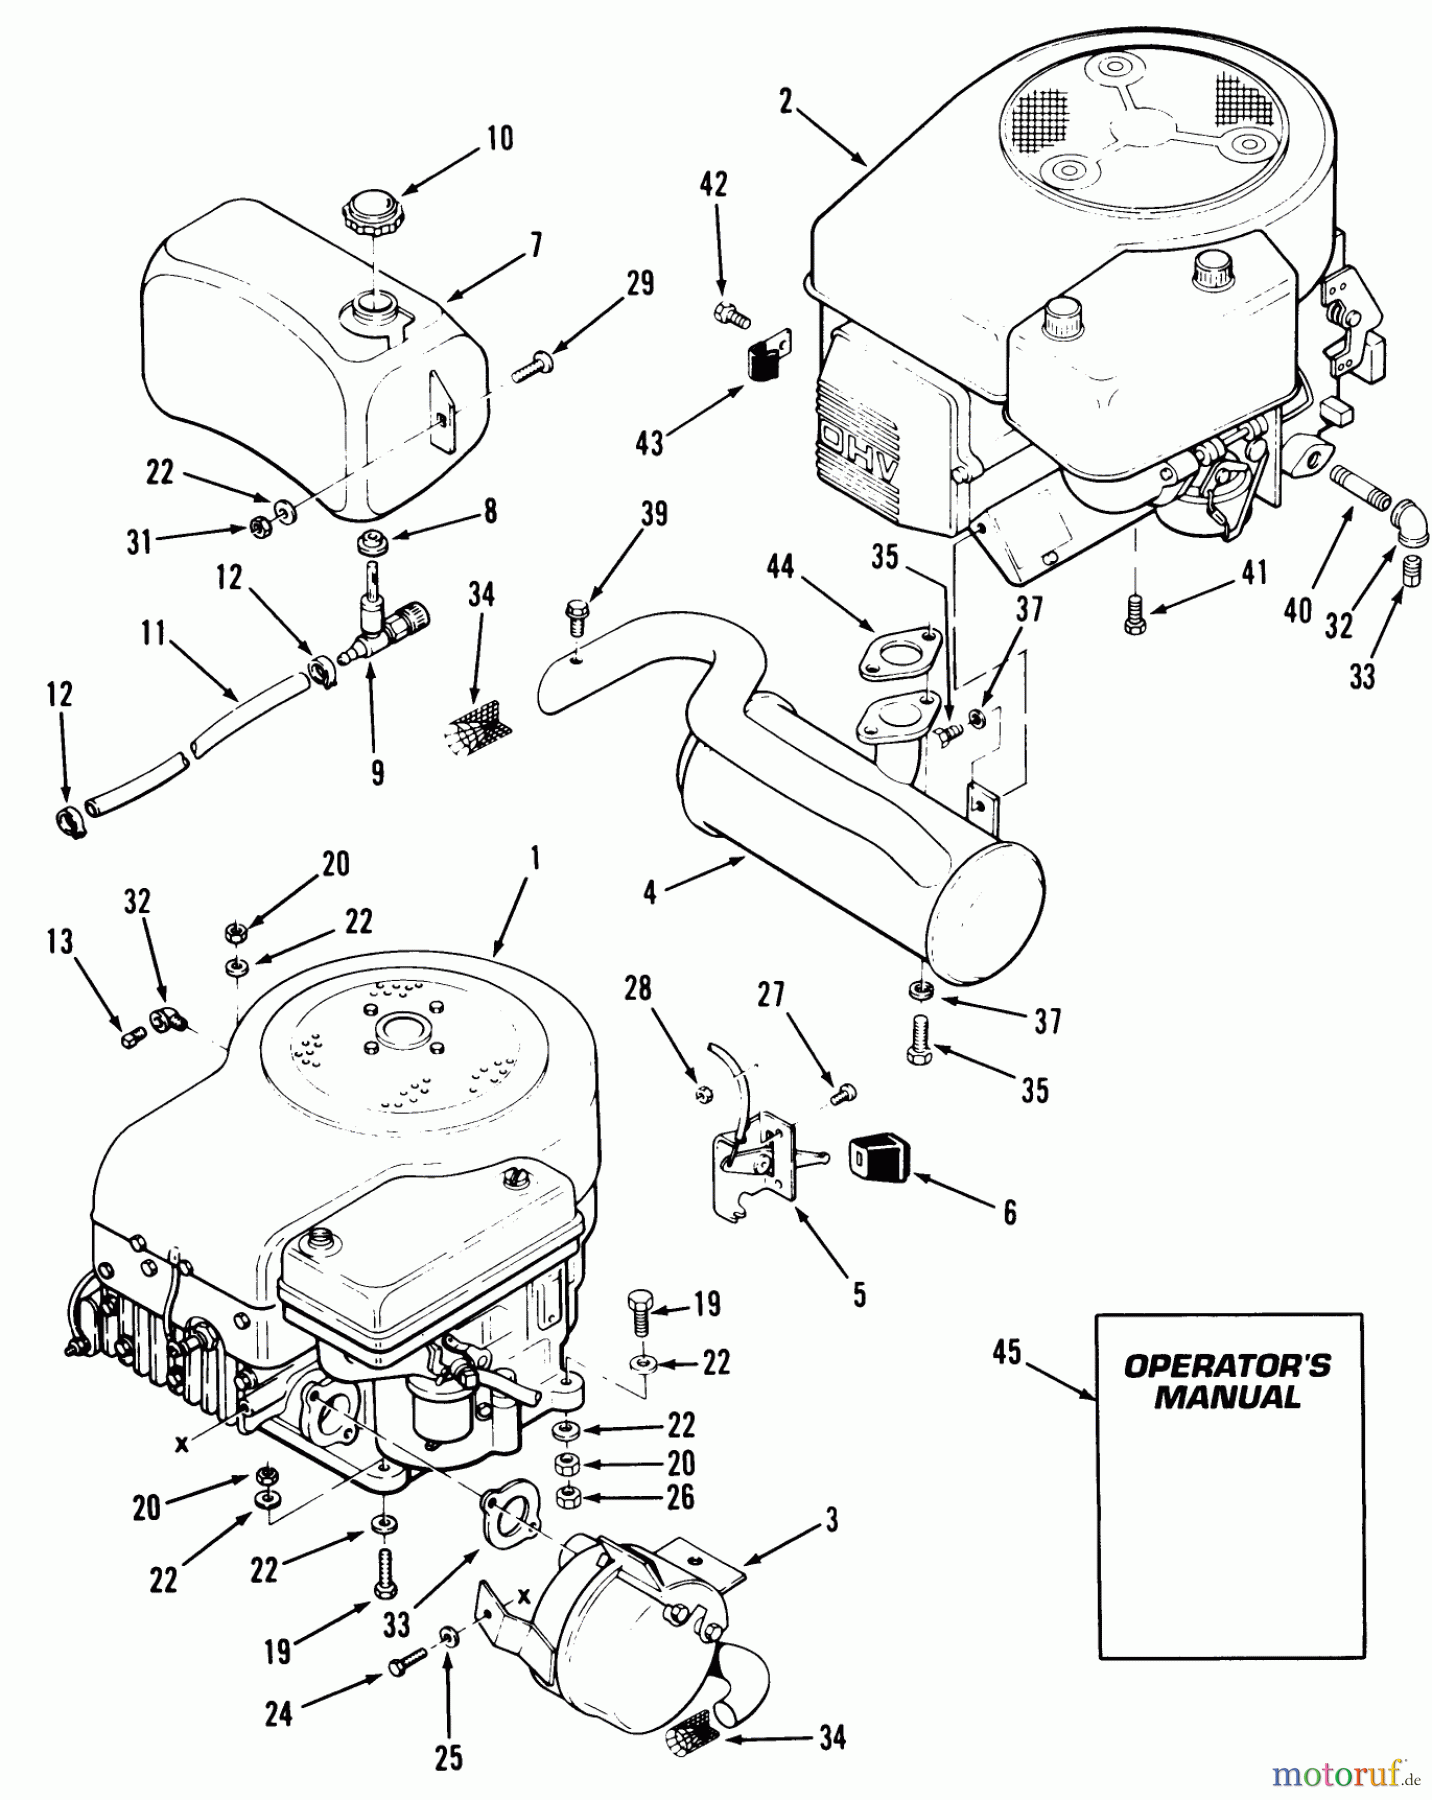  Toro Neu Mowers, Lawn & Garden Tractor Seite 1 32-10BE03 (210-H) - Toro 210-H Tractor, 1992 (2000001-2999999) ENGINE FUEL & EXHAUST ASSEMBLY